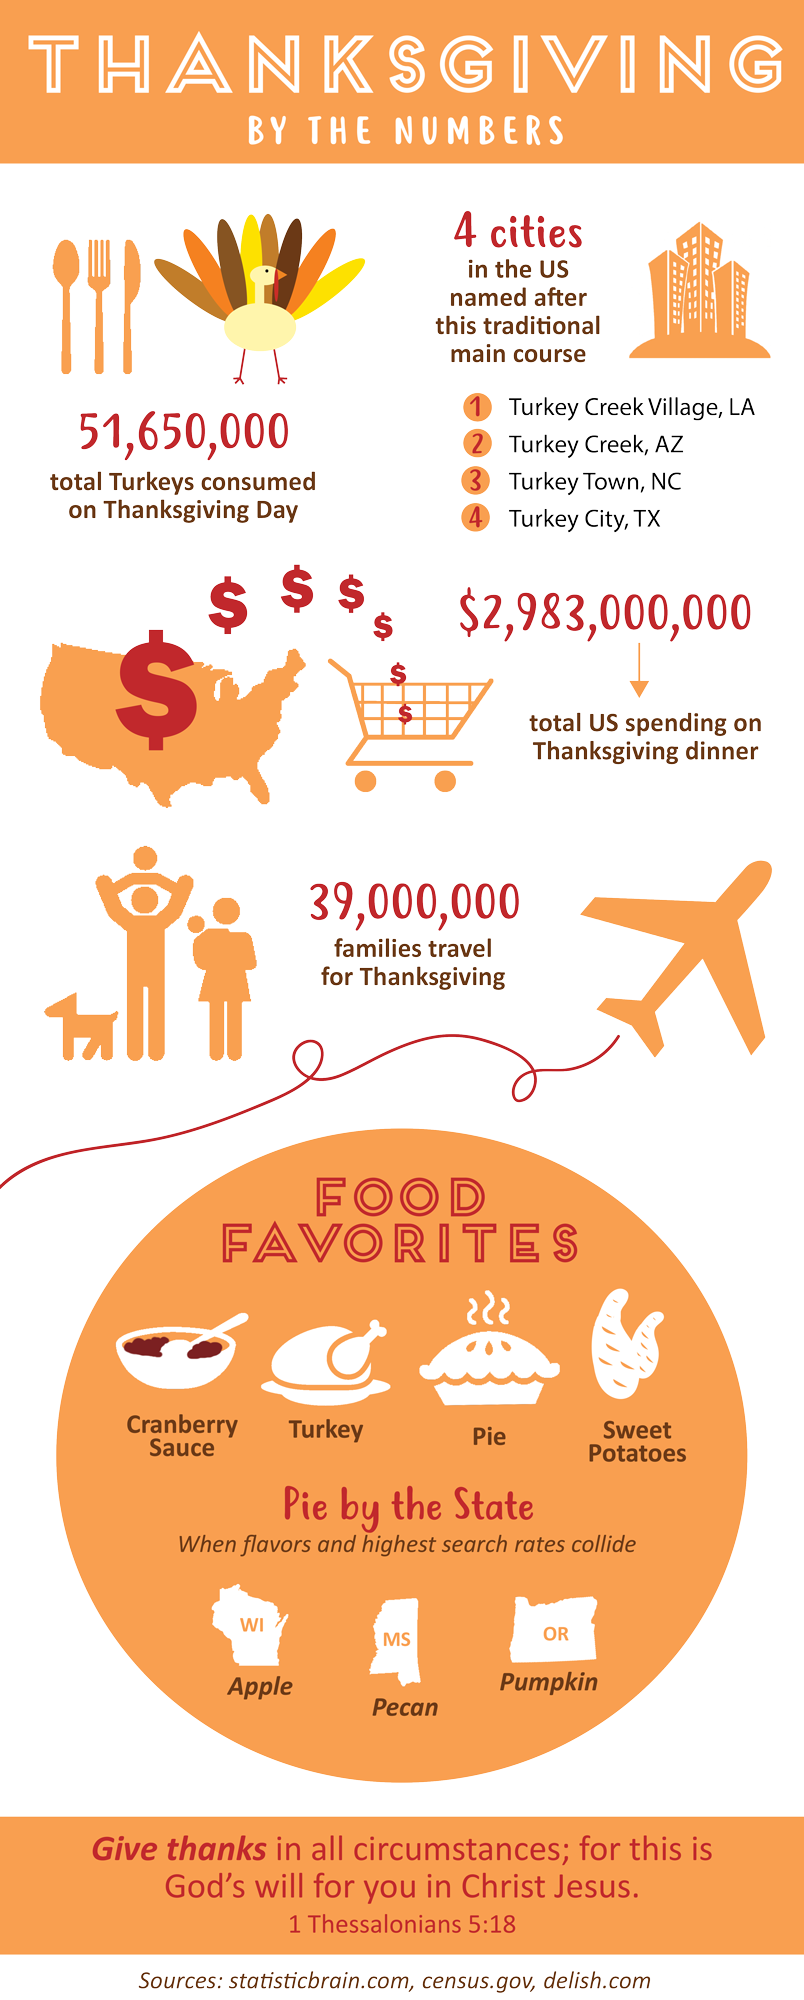 30 Infographics to Help You Prepare for Thanksgiving - Part 12